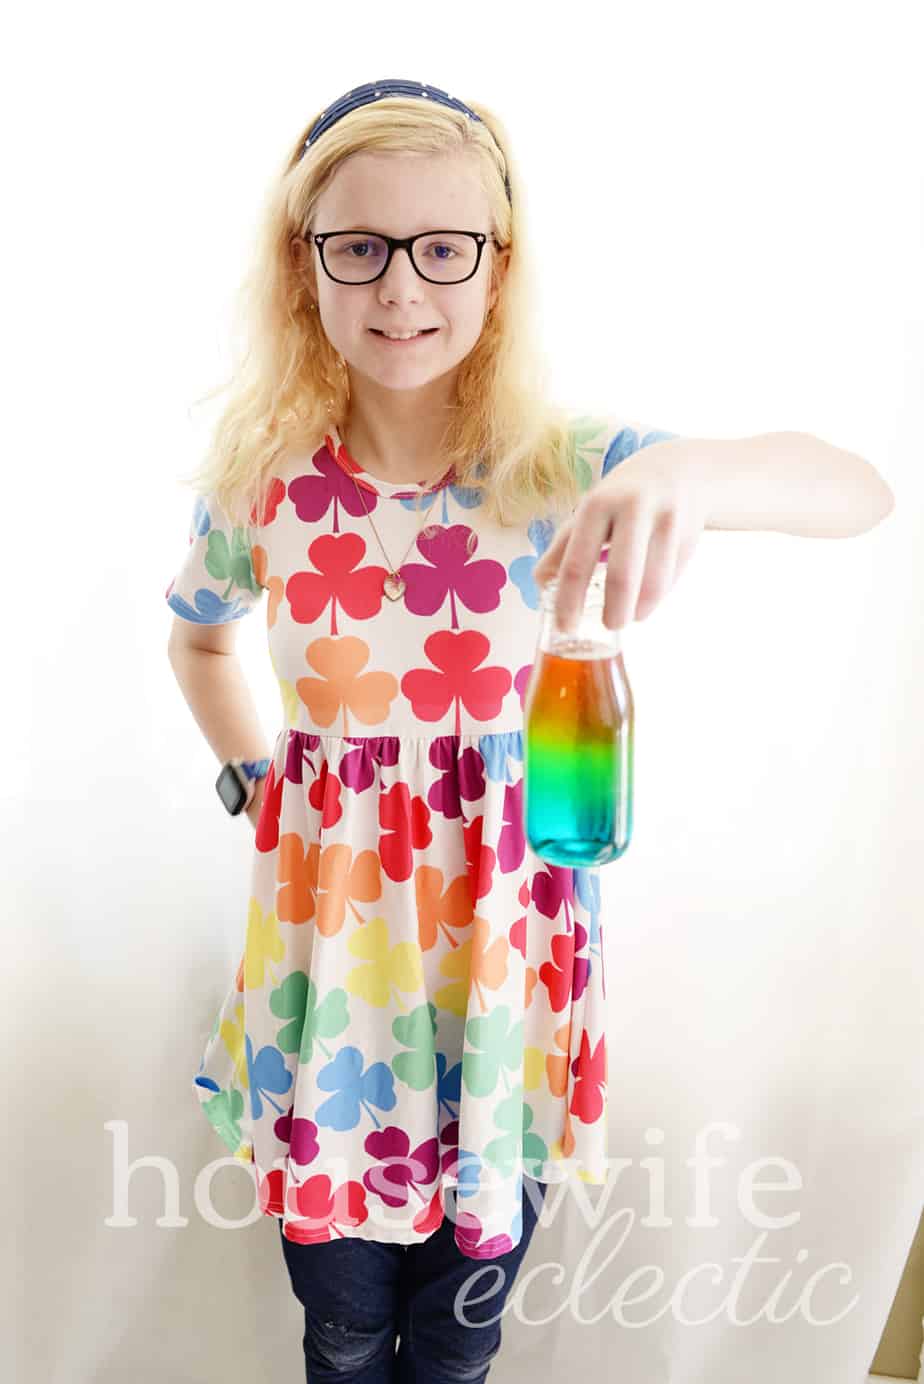 Housewife Eclectic: Rainbow in a Jar Science Experiment